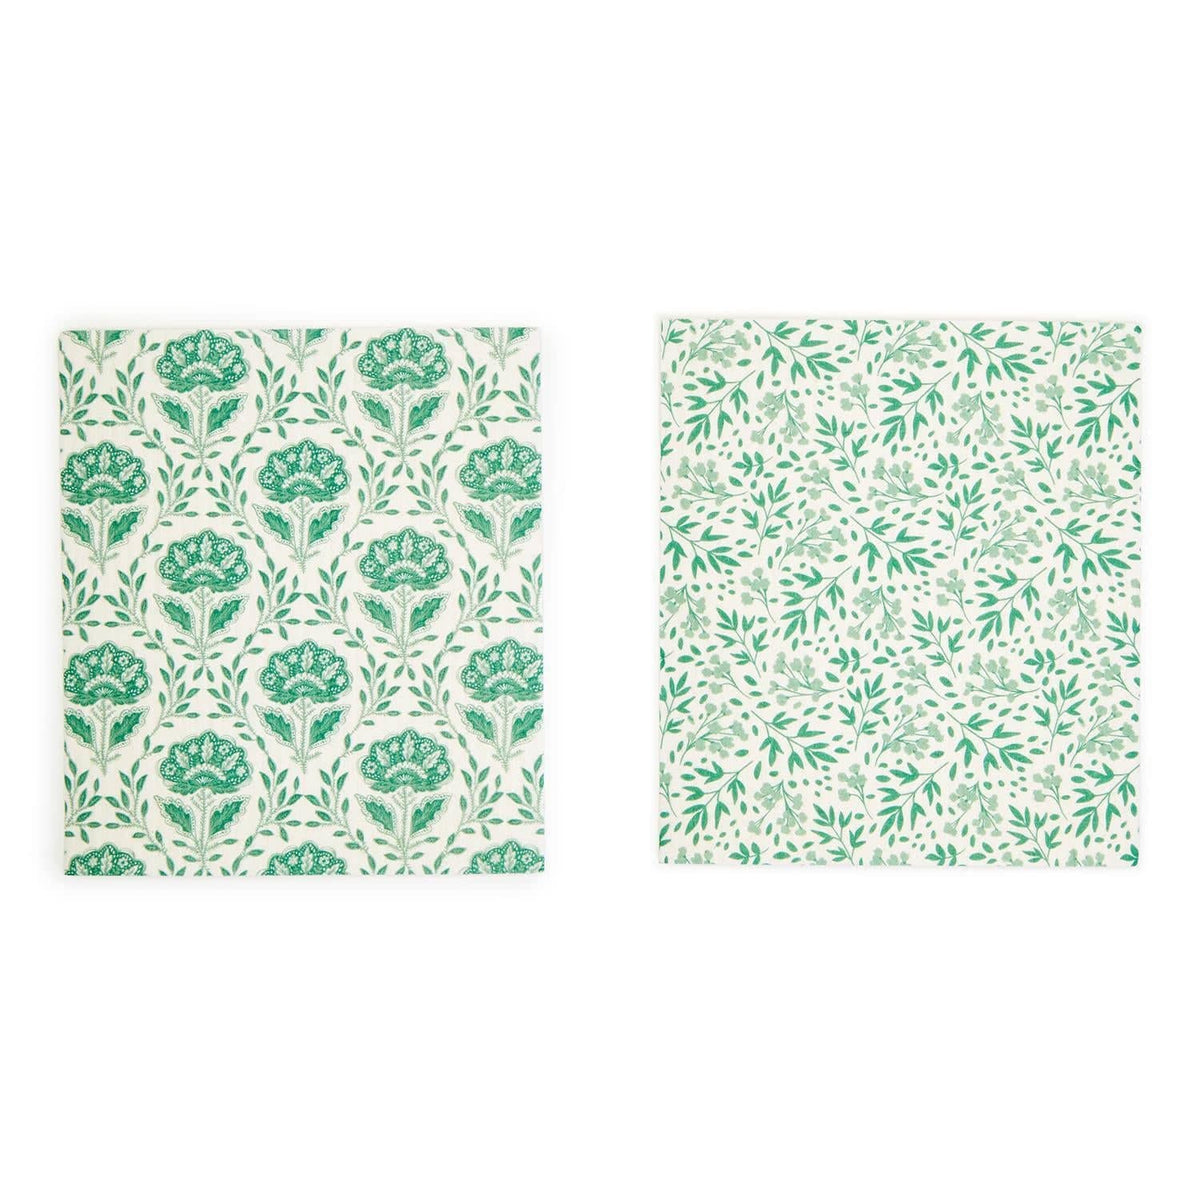 Multipurpose Kitchen Cloth - Countryside - The Preppy Bunny